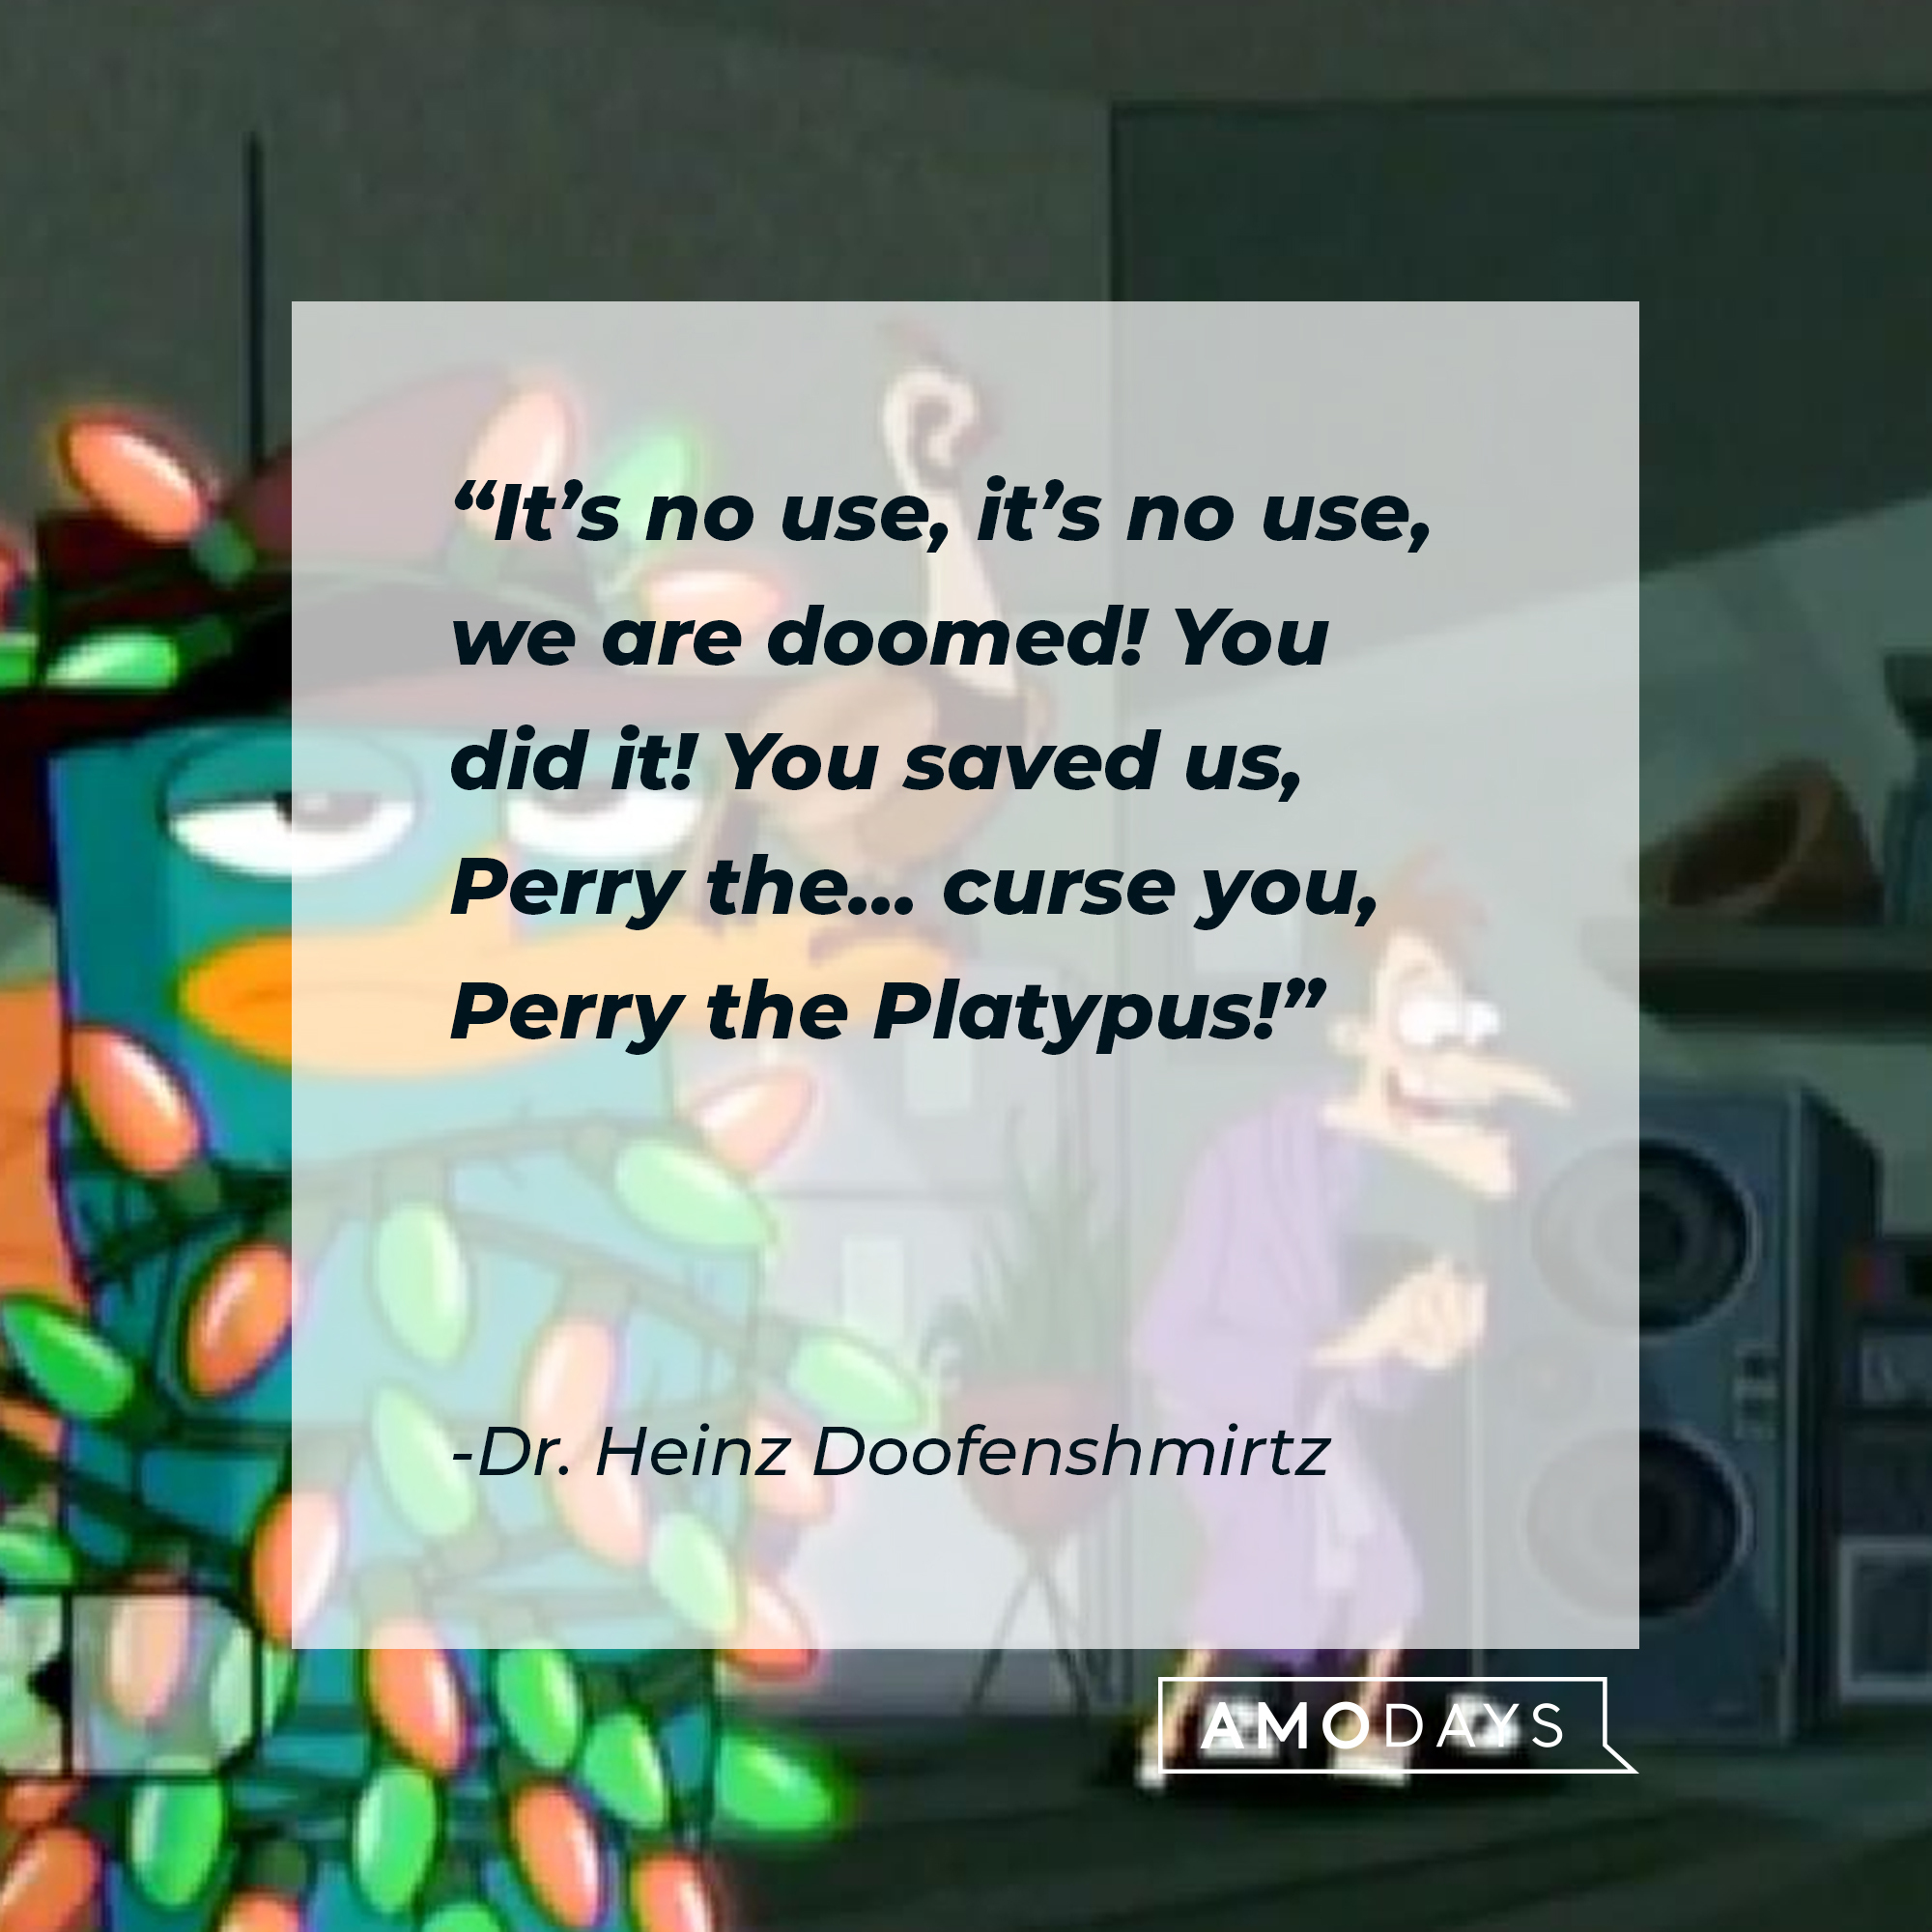 Dr. Heinz Doofenshmirtz' quote: "It's no use, it's no use, we are doomed! You did it! You saved us, Perry the...curse you, Perry the Platypus!" | Source: facebook.com/Phineas-and-Ferb